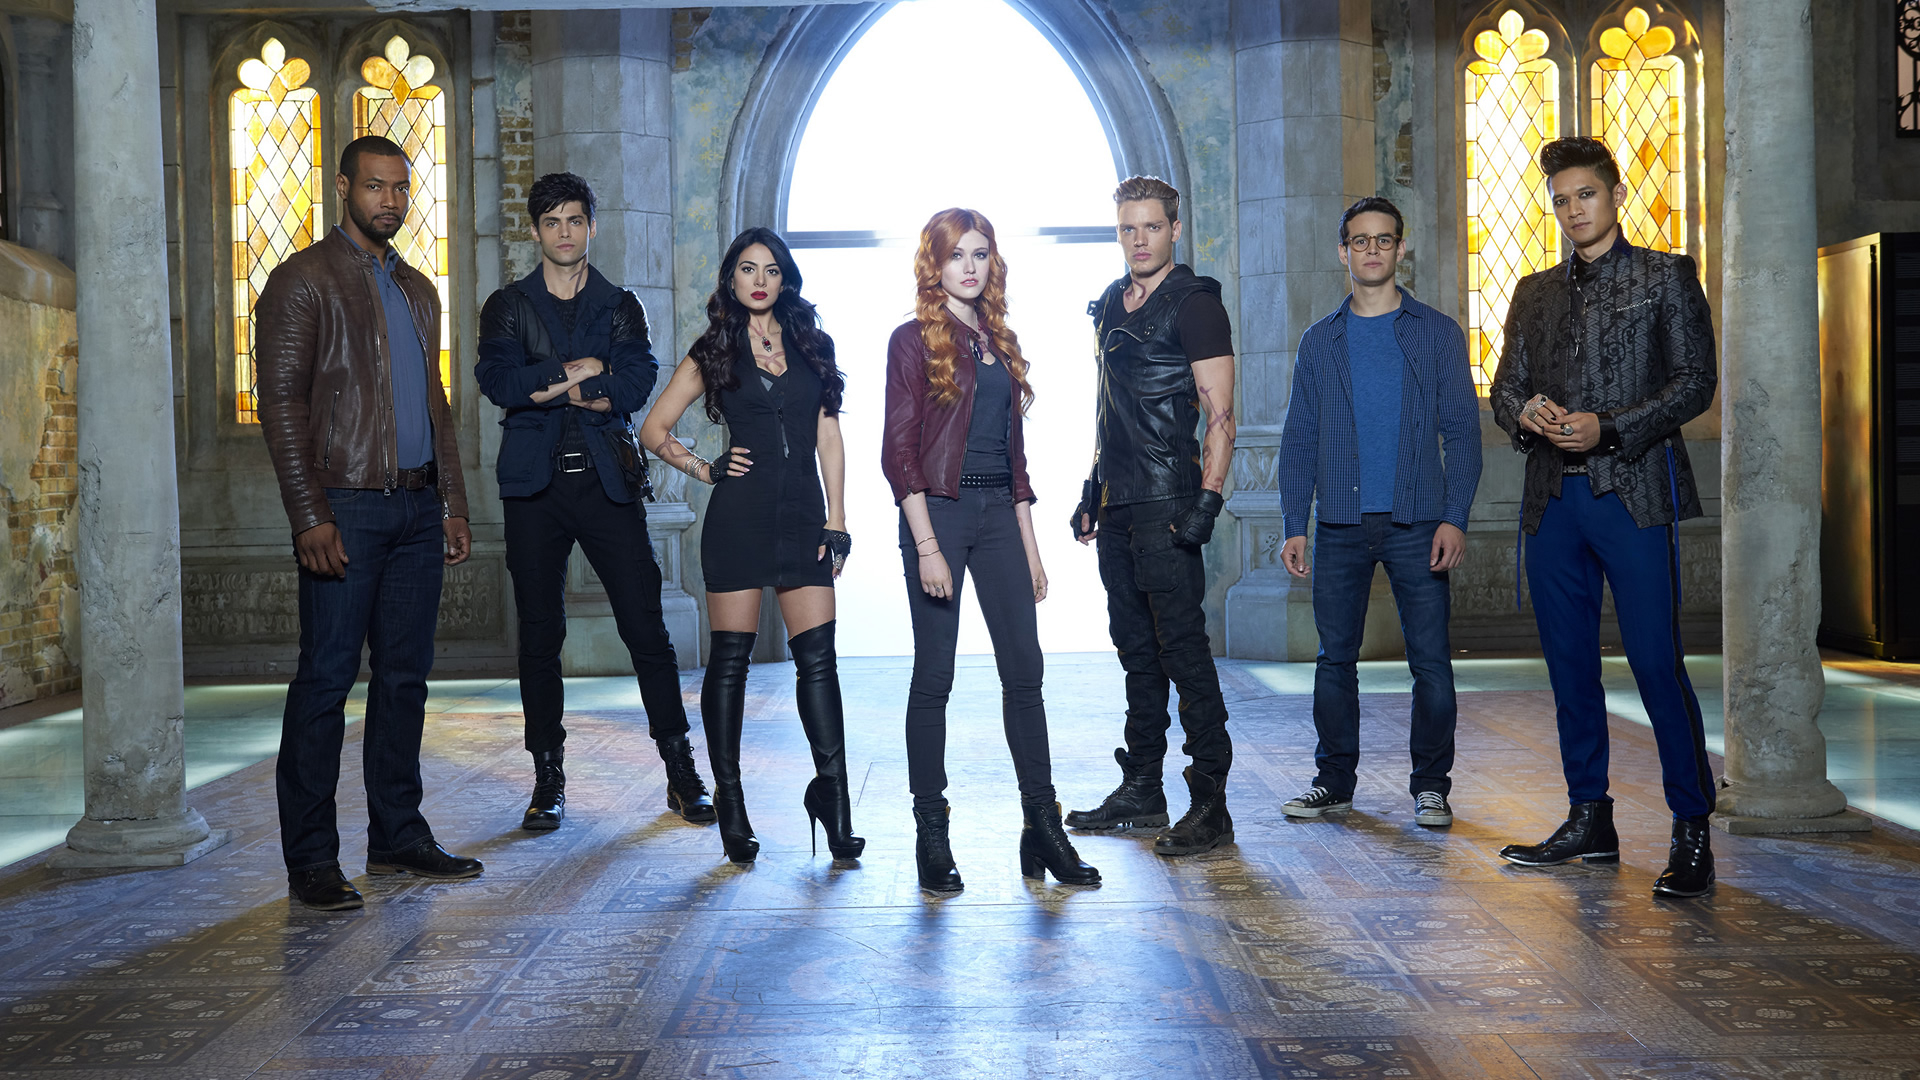 1920x1080 10+ Shadowhunters HD Wallpapers and Backgrounds